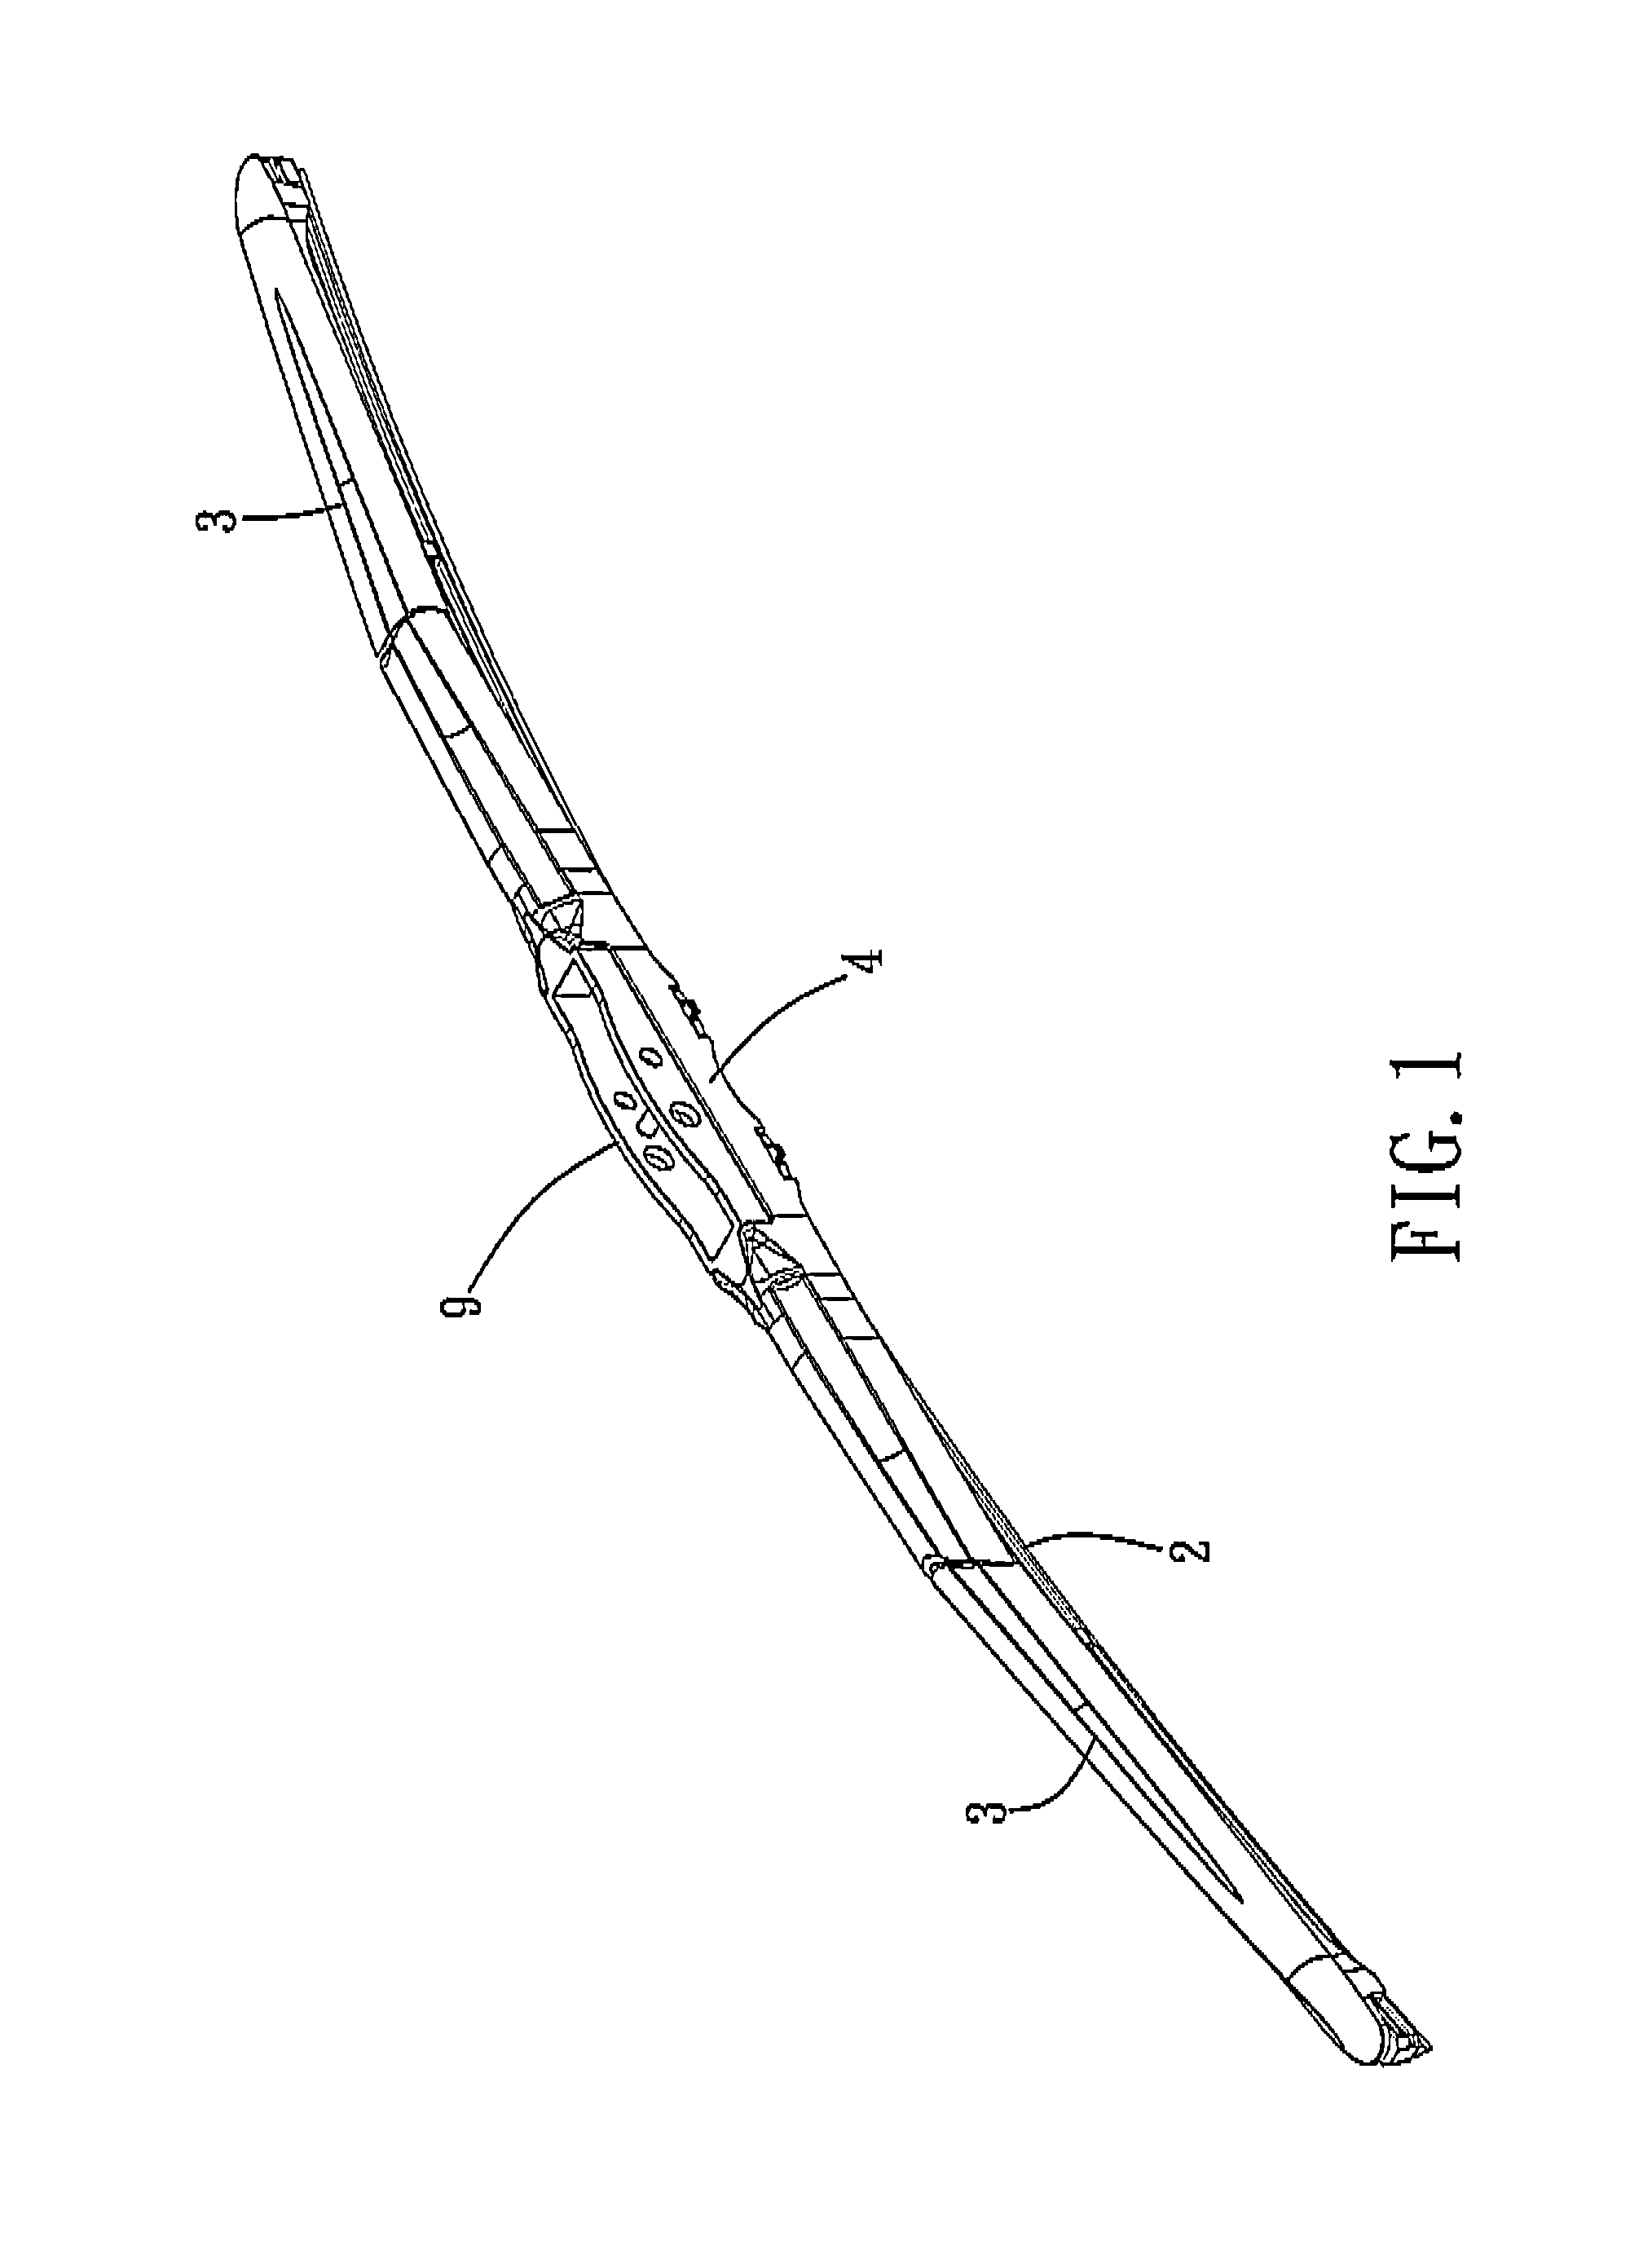 Windshield wiper blade assembly